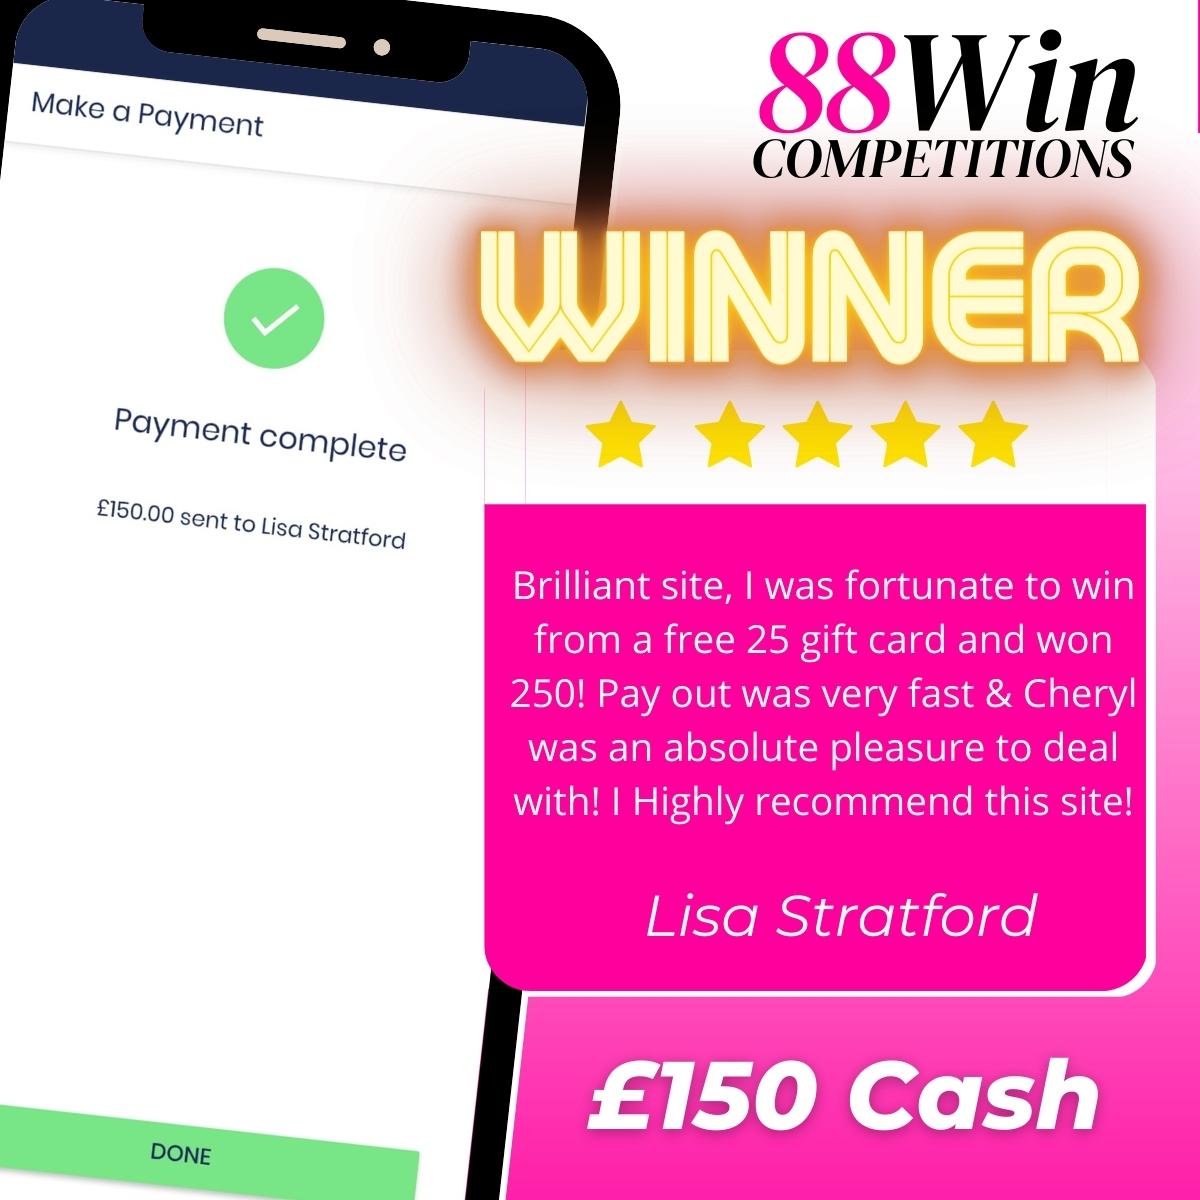 88Win Competitions £150 Winner Photo